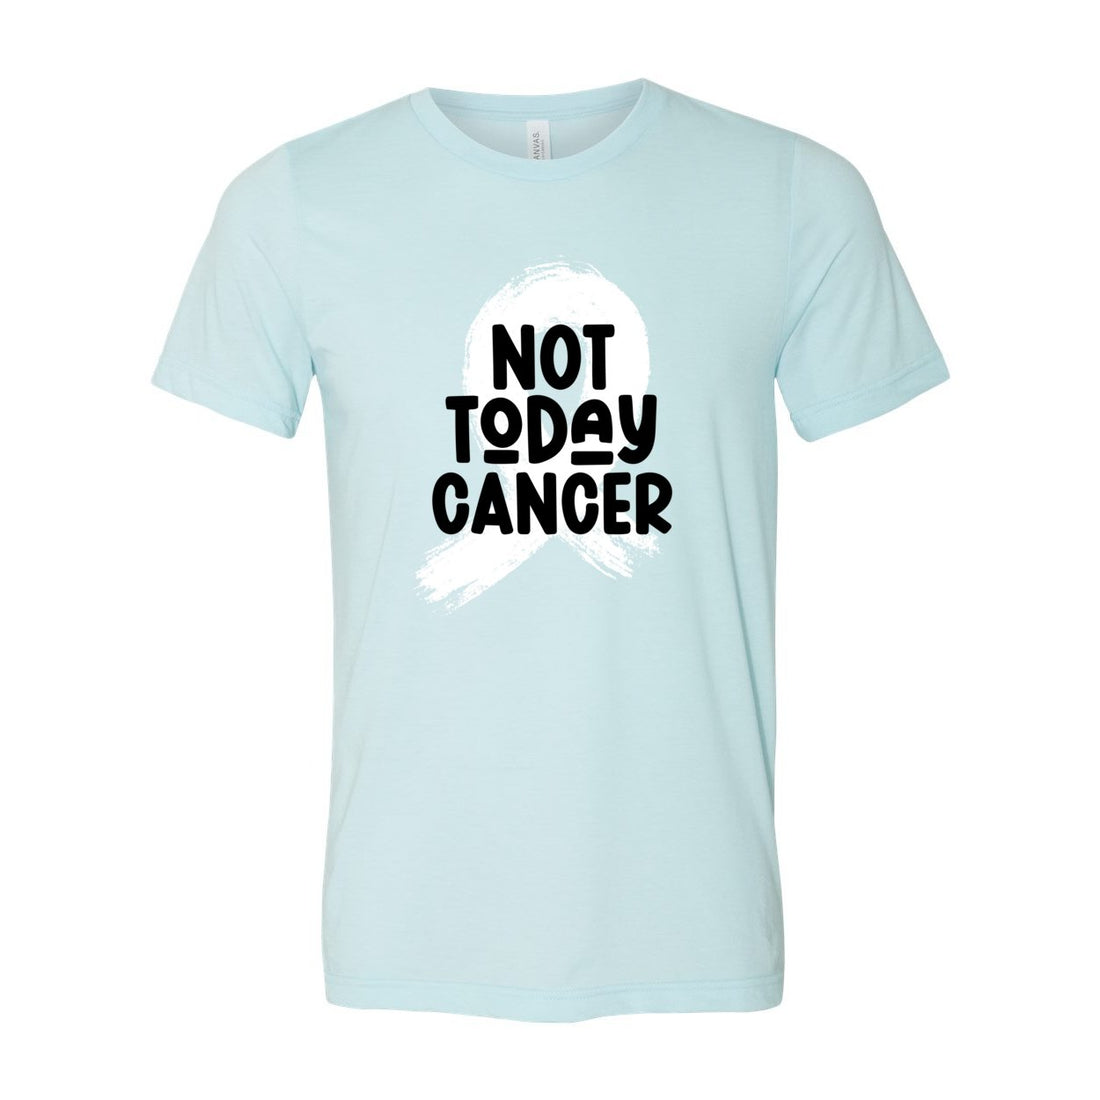 Not Today Cancer - T-Shirts - Positively Sassy - Not Today Cancer